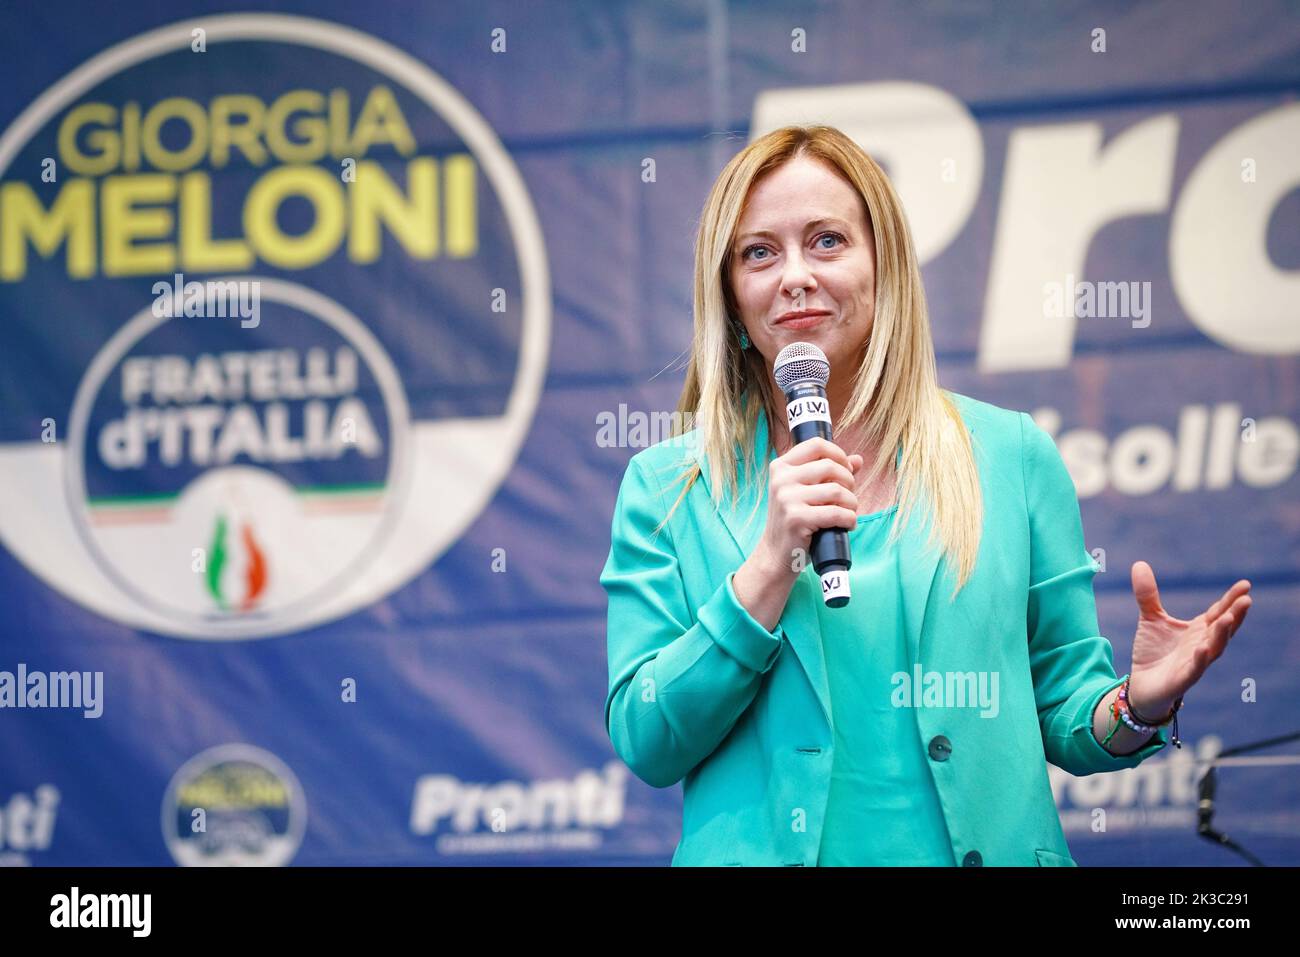 Electoral rally by Giorgia Meloni, leader of Fratelli d'Italia party, candidate for premier in the political elections. Turin, Italy - September 2022 Stock Photo